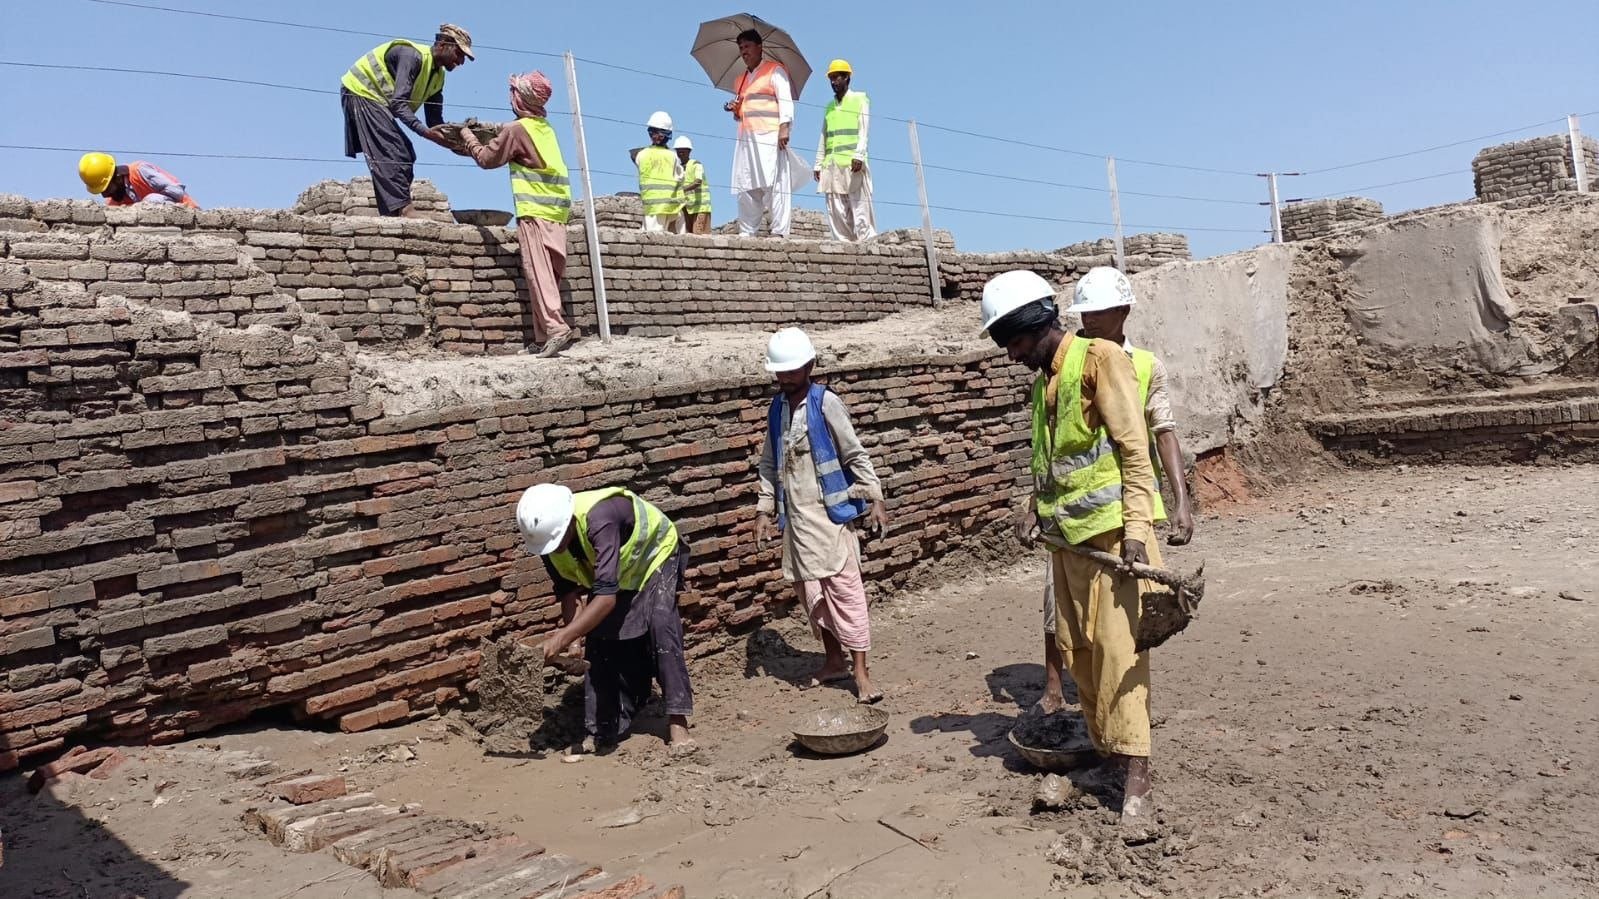 Workers doing patch work in between the iconic baked bricks dating back to the beginning of the 3rd millennium BC. — Photo by author